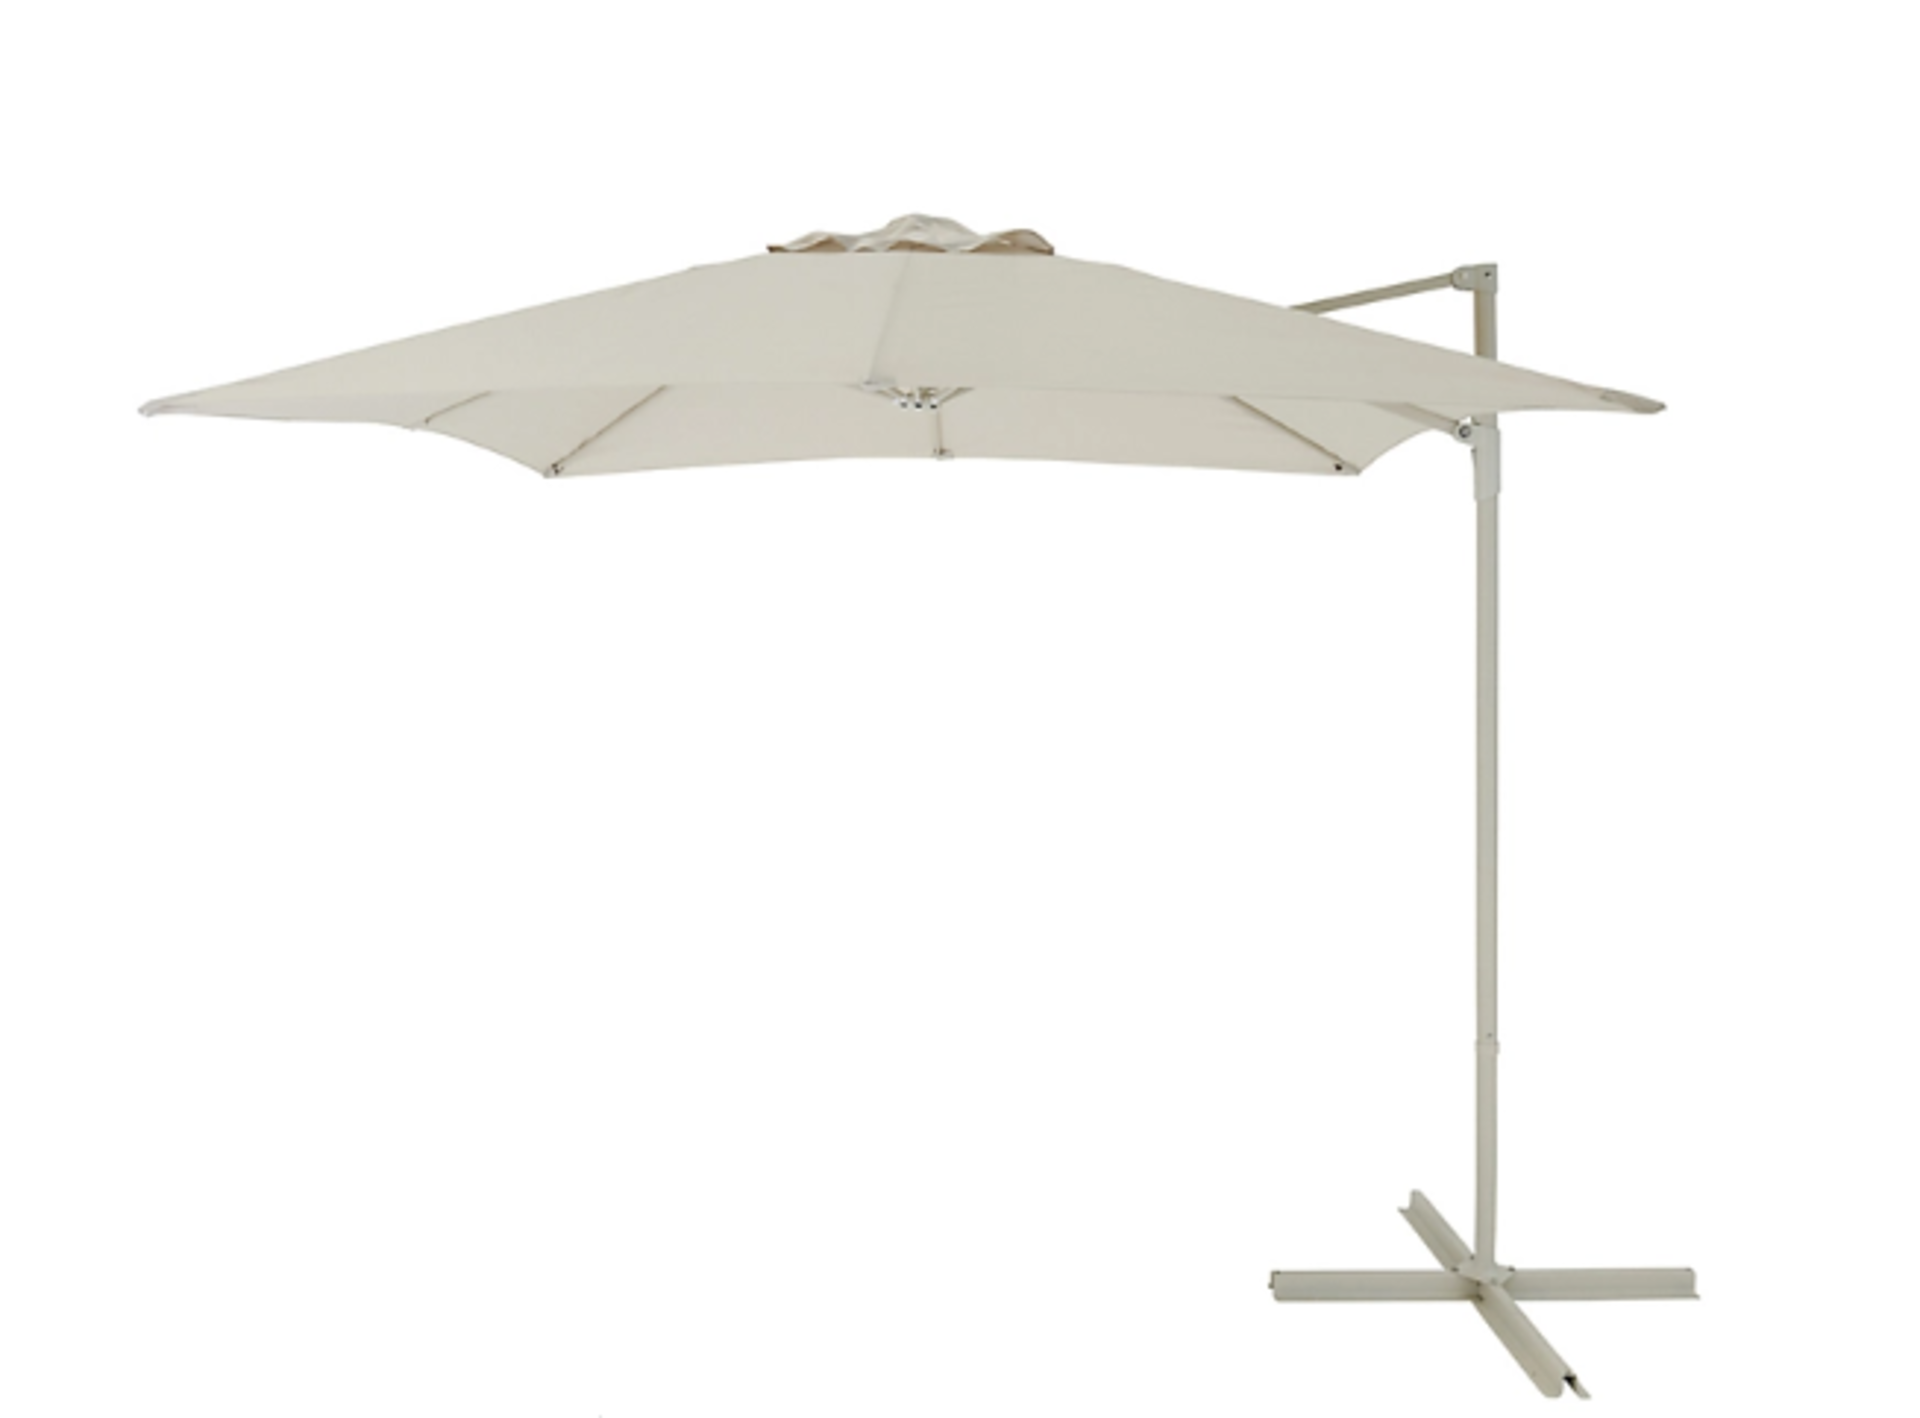 New & Boxed Luxury 2.5m Sand Overhanging Parasol- Sand. This square overhanging parasol provides - Image 3 of 8